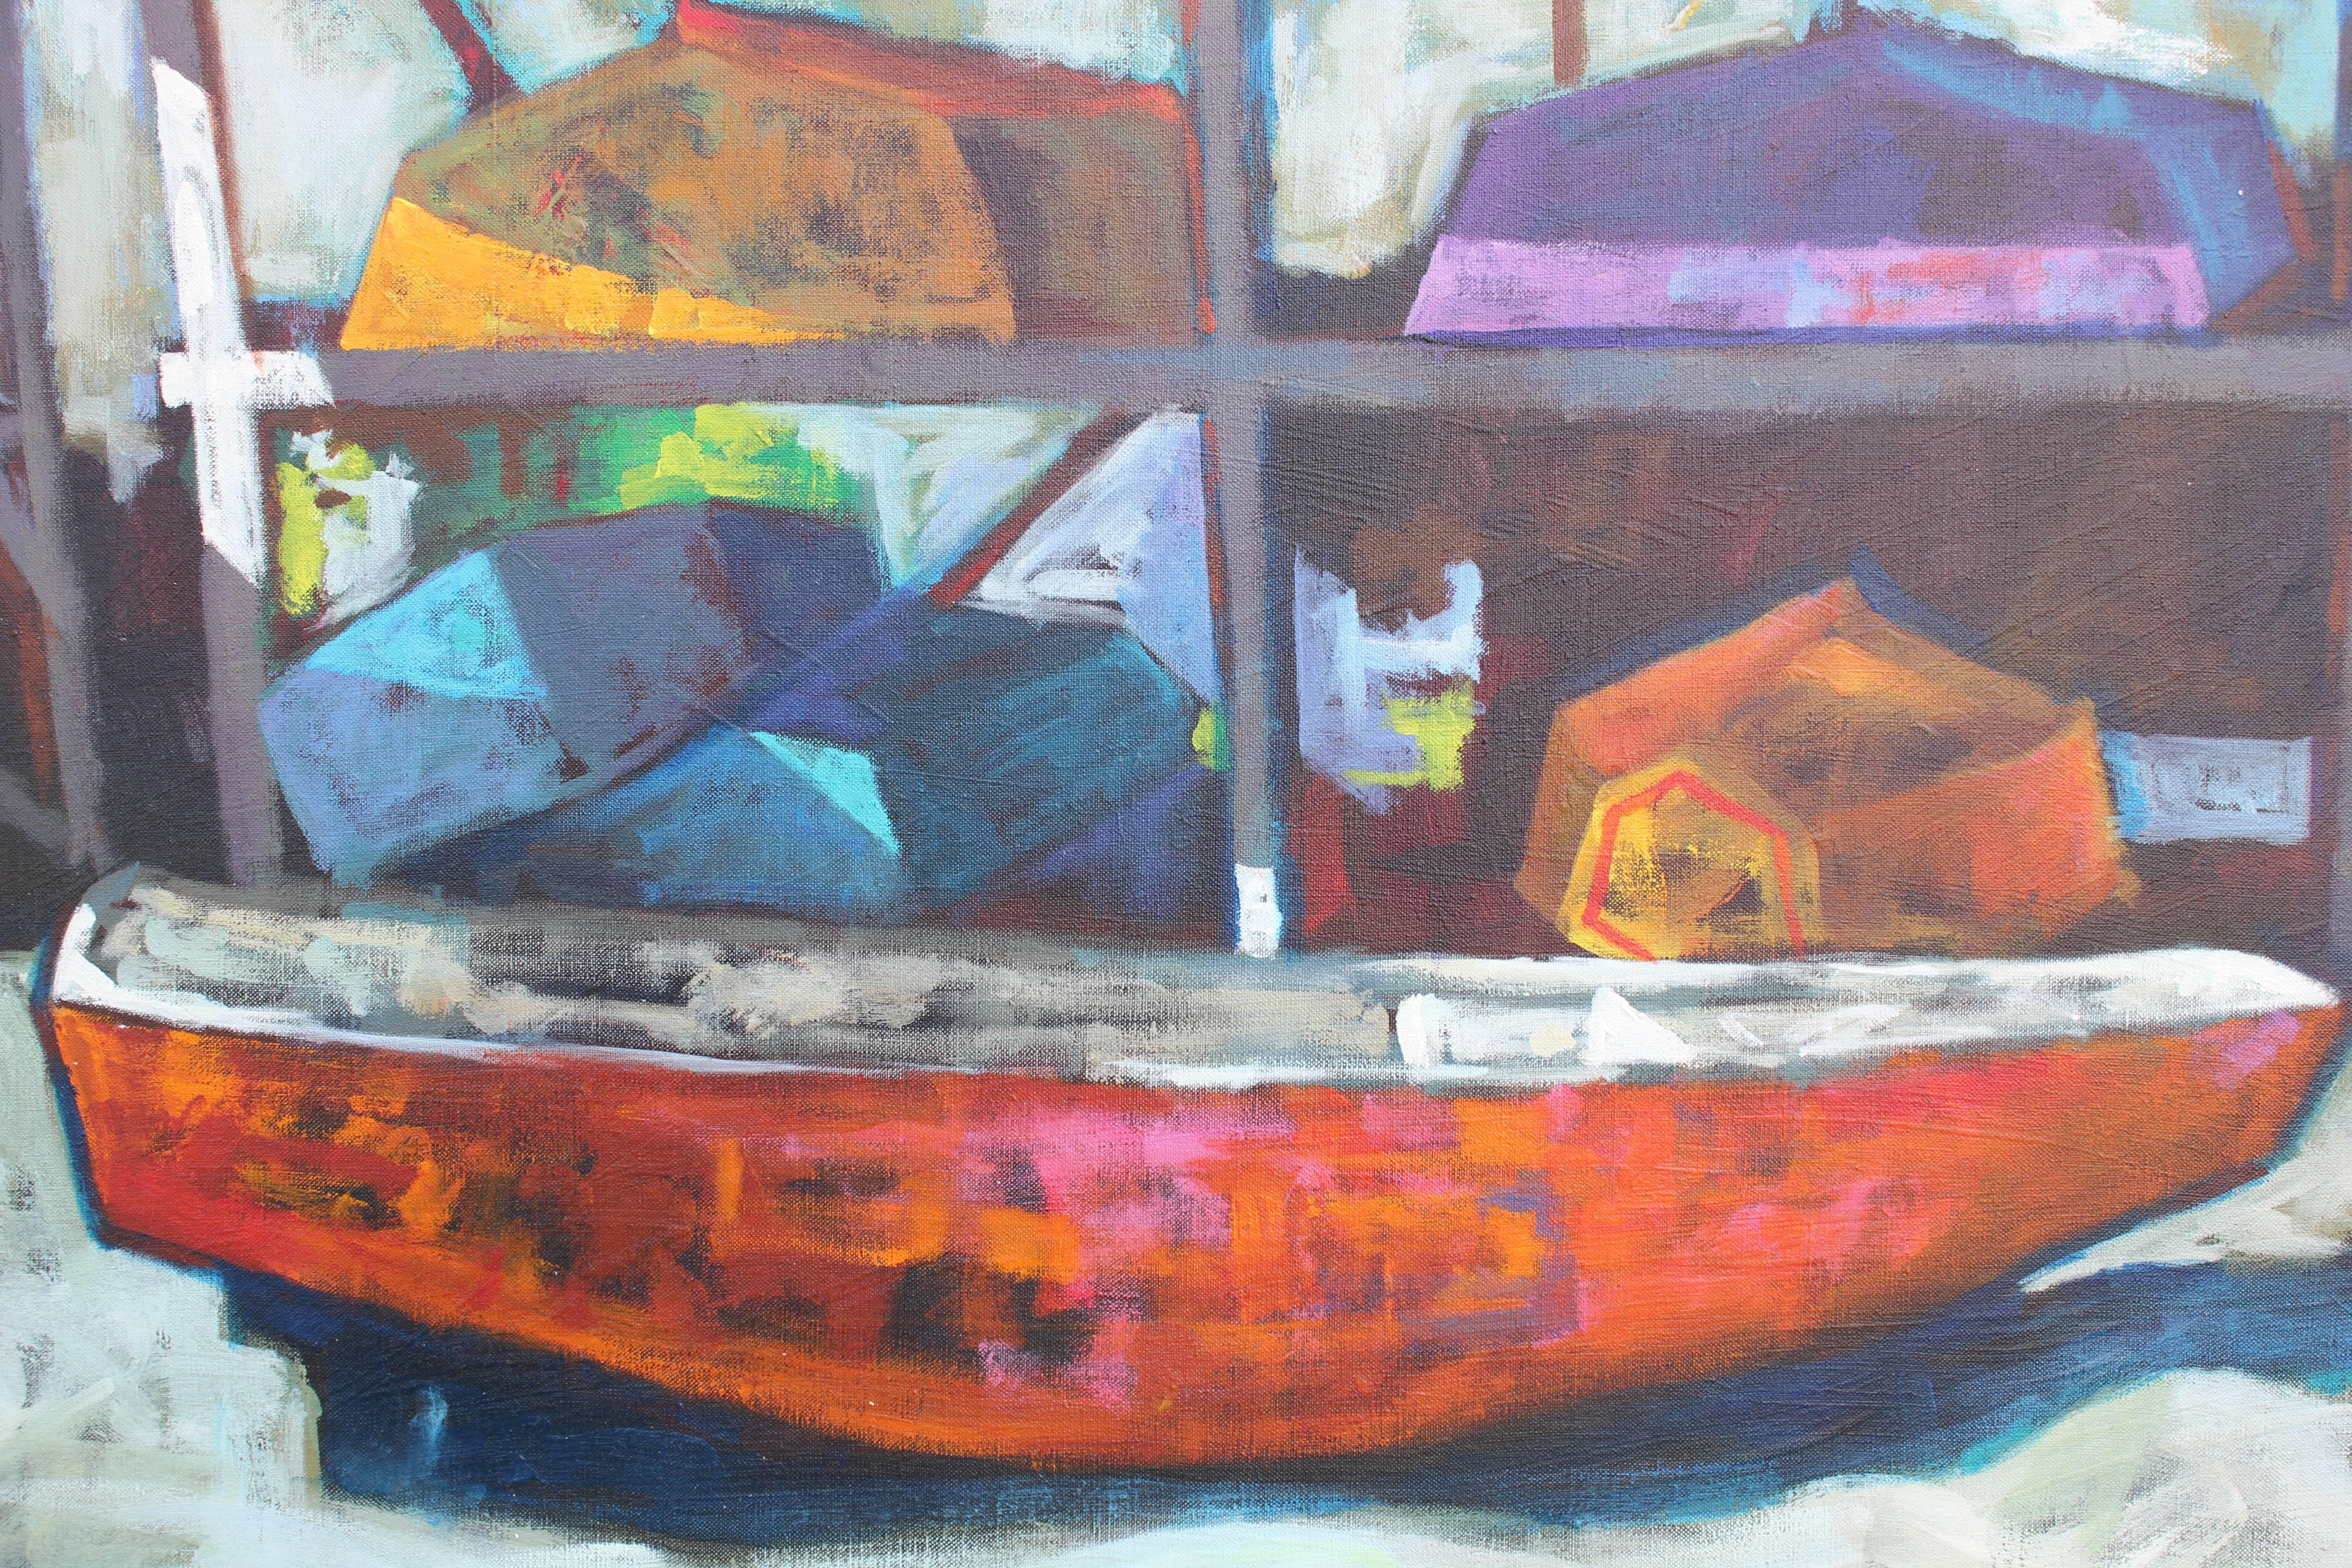 Abstract of a boat storage dock. Mainly red, orange, and purple tones. Framed in a gold frame with a white matte. Signed by the artist in the bottom left corner. 

Artist Biography: Bill lived in Apopka, FL. He was born in Delaware. He was a